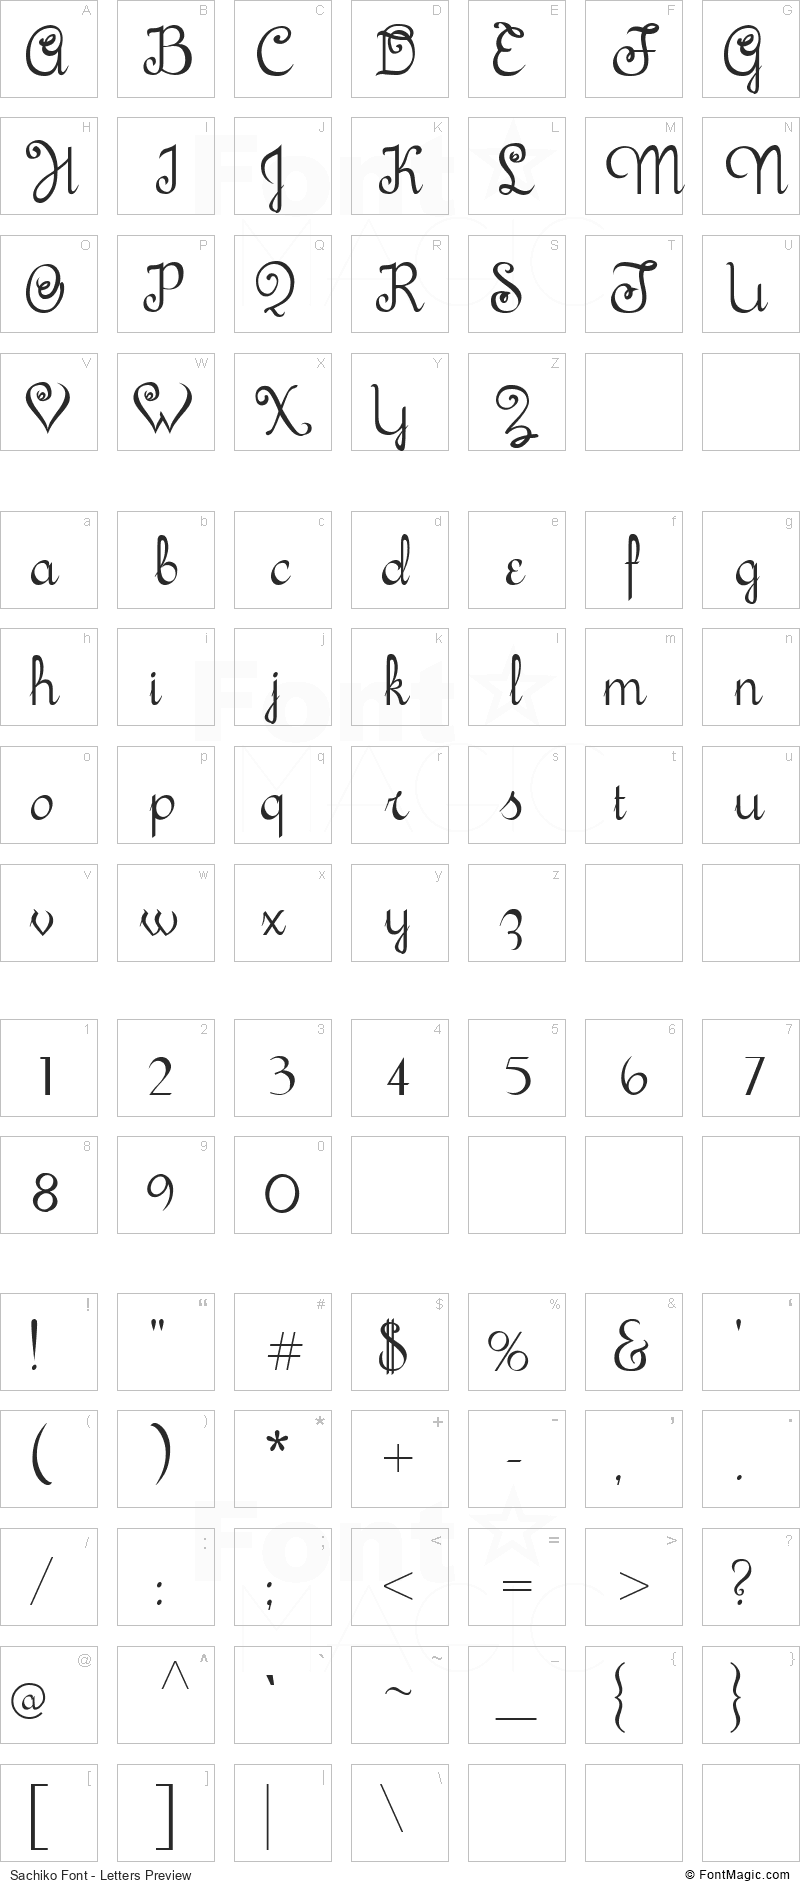 Sachiko Font - All Latters Preview Chart